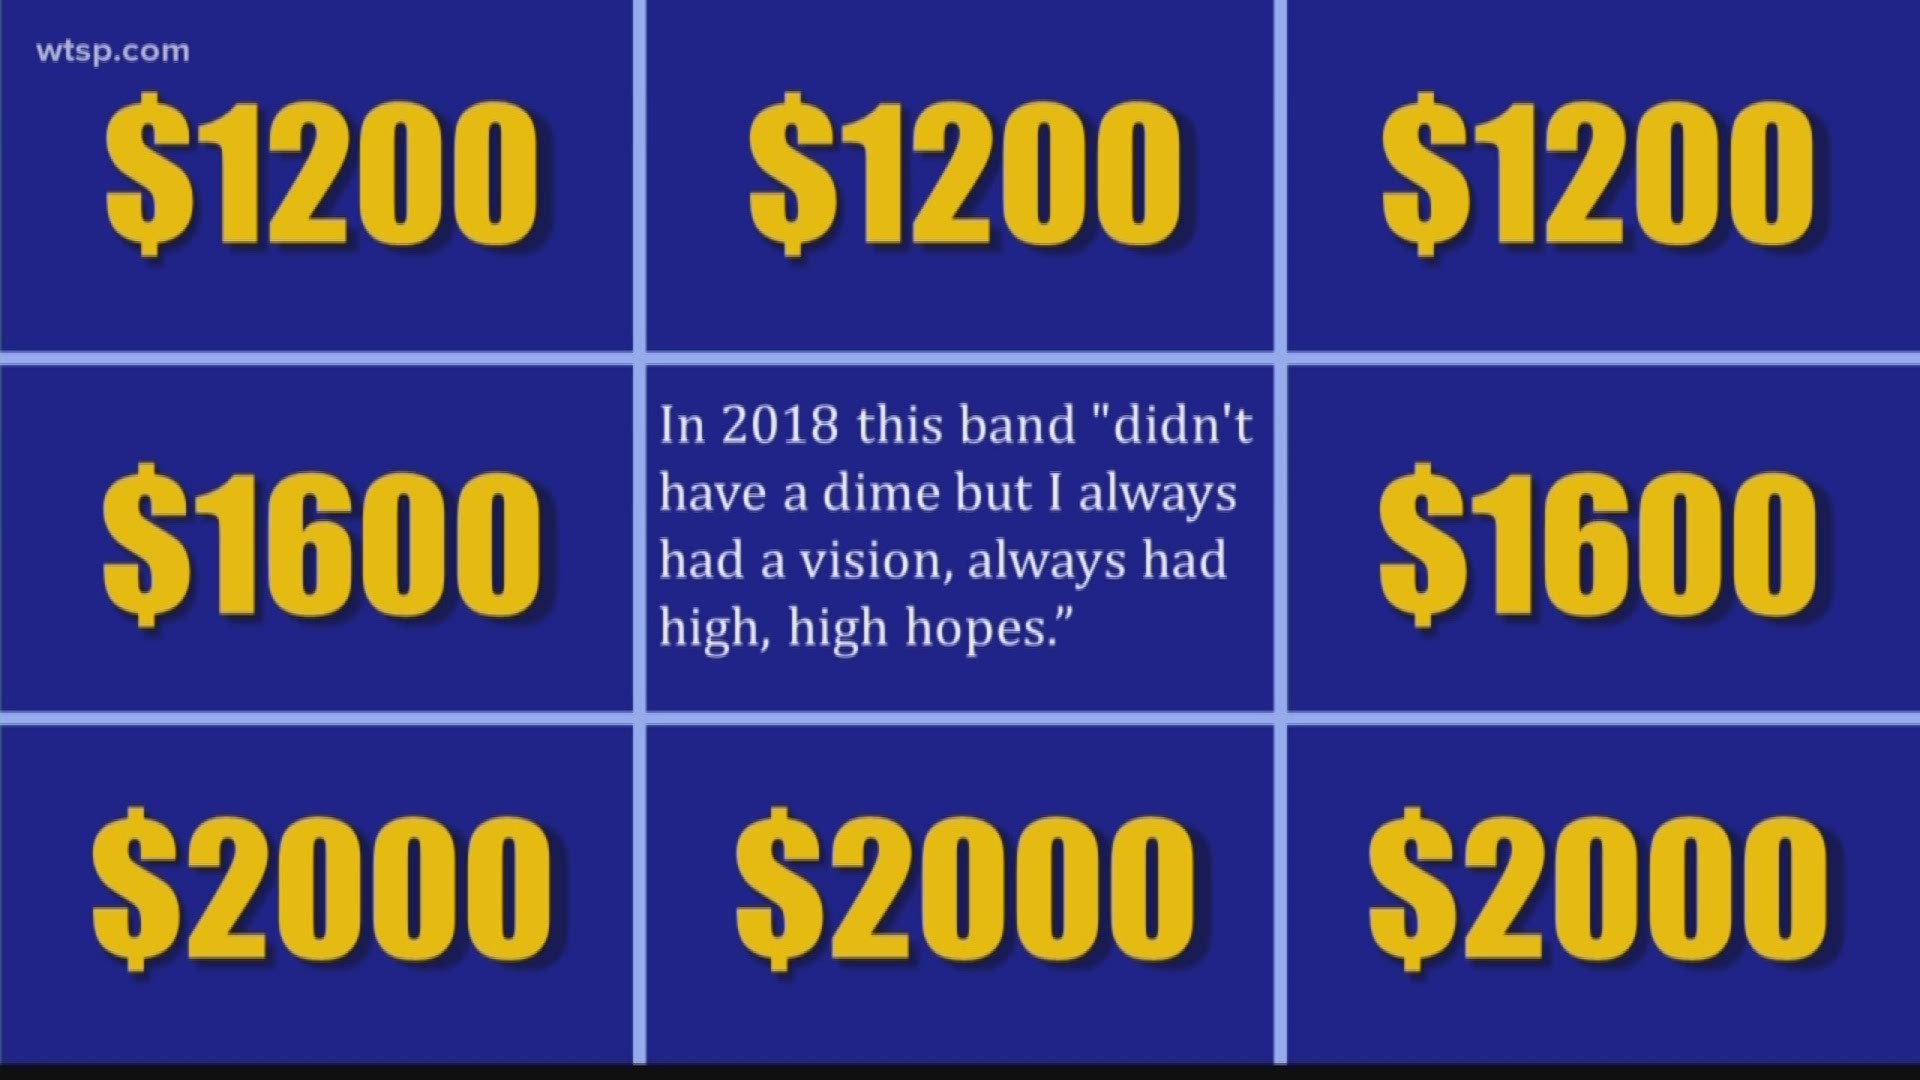 The 'Jeopardy' champion has amassed more than a million dollars, but he has gotten some answers ... er, questions wrong. See if you know more than he does. (PS, the question is "Who is Ben Affleck?")